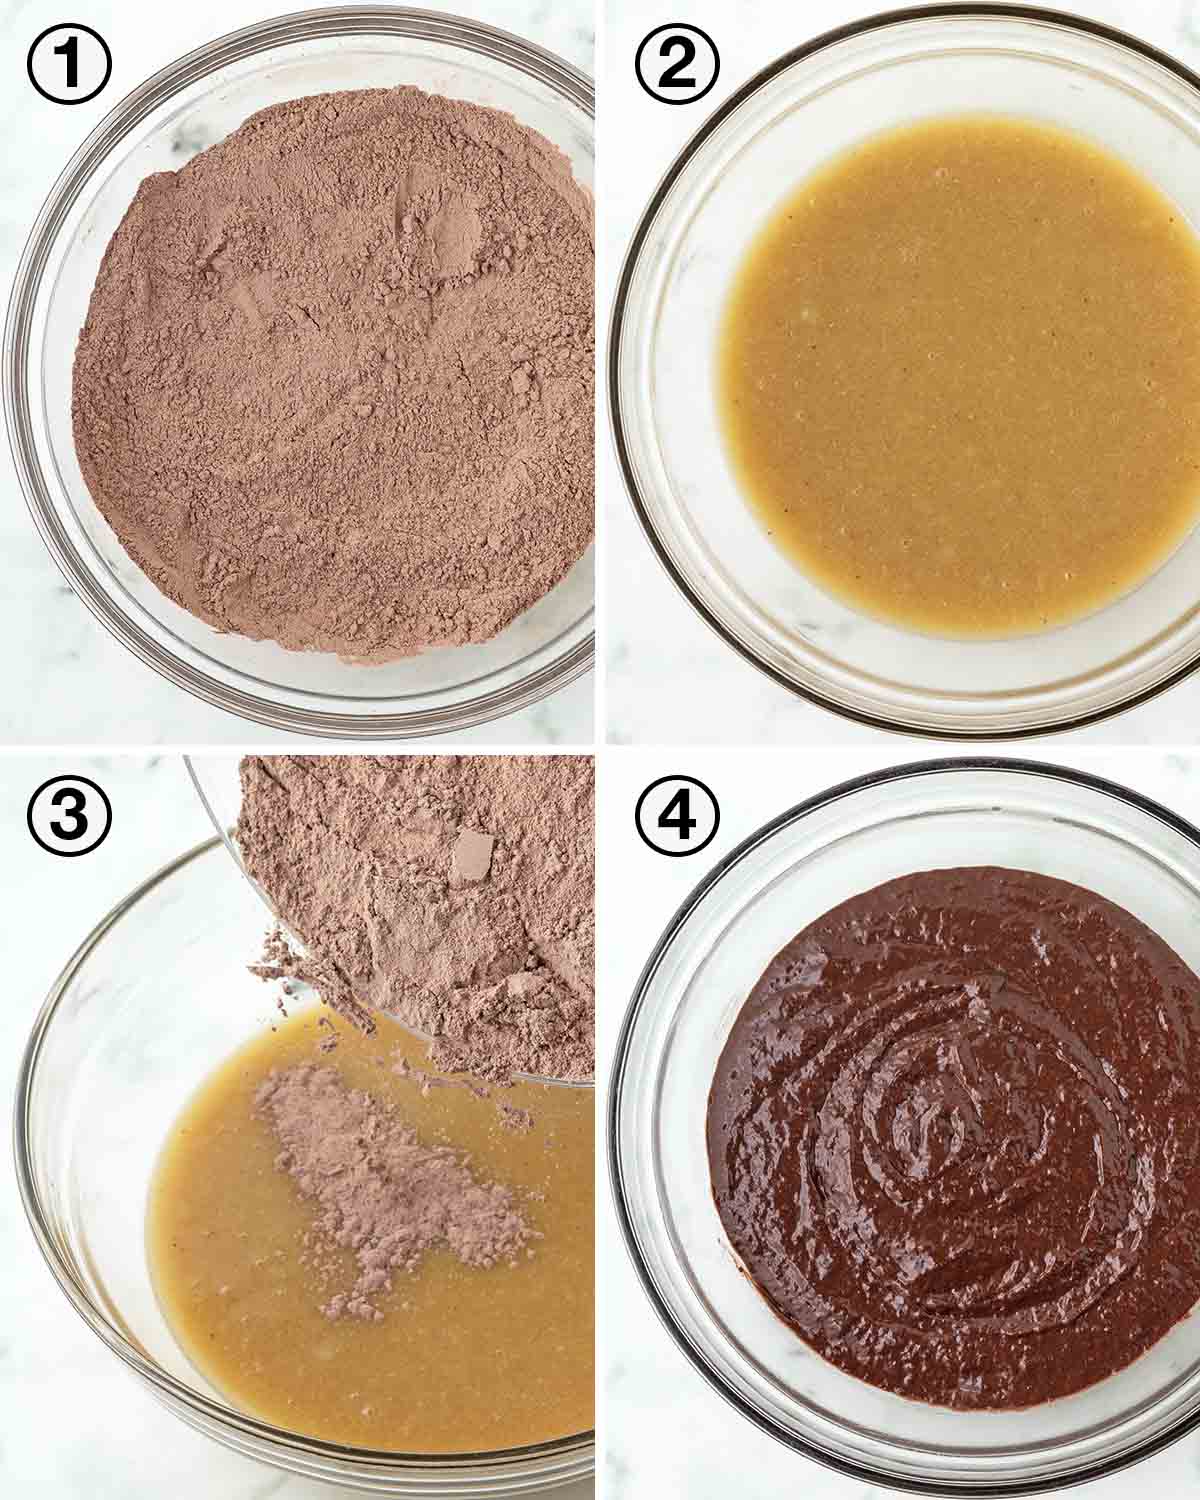 A collage of four images showing the first sequence of steps needed to make vegan chocolate banana cake.